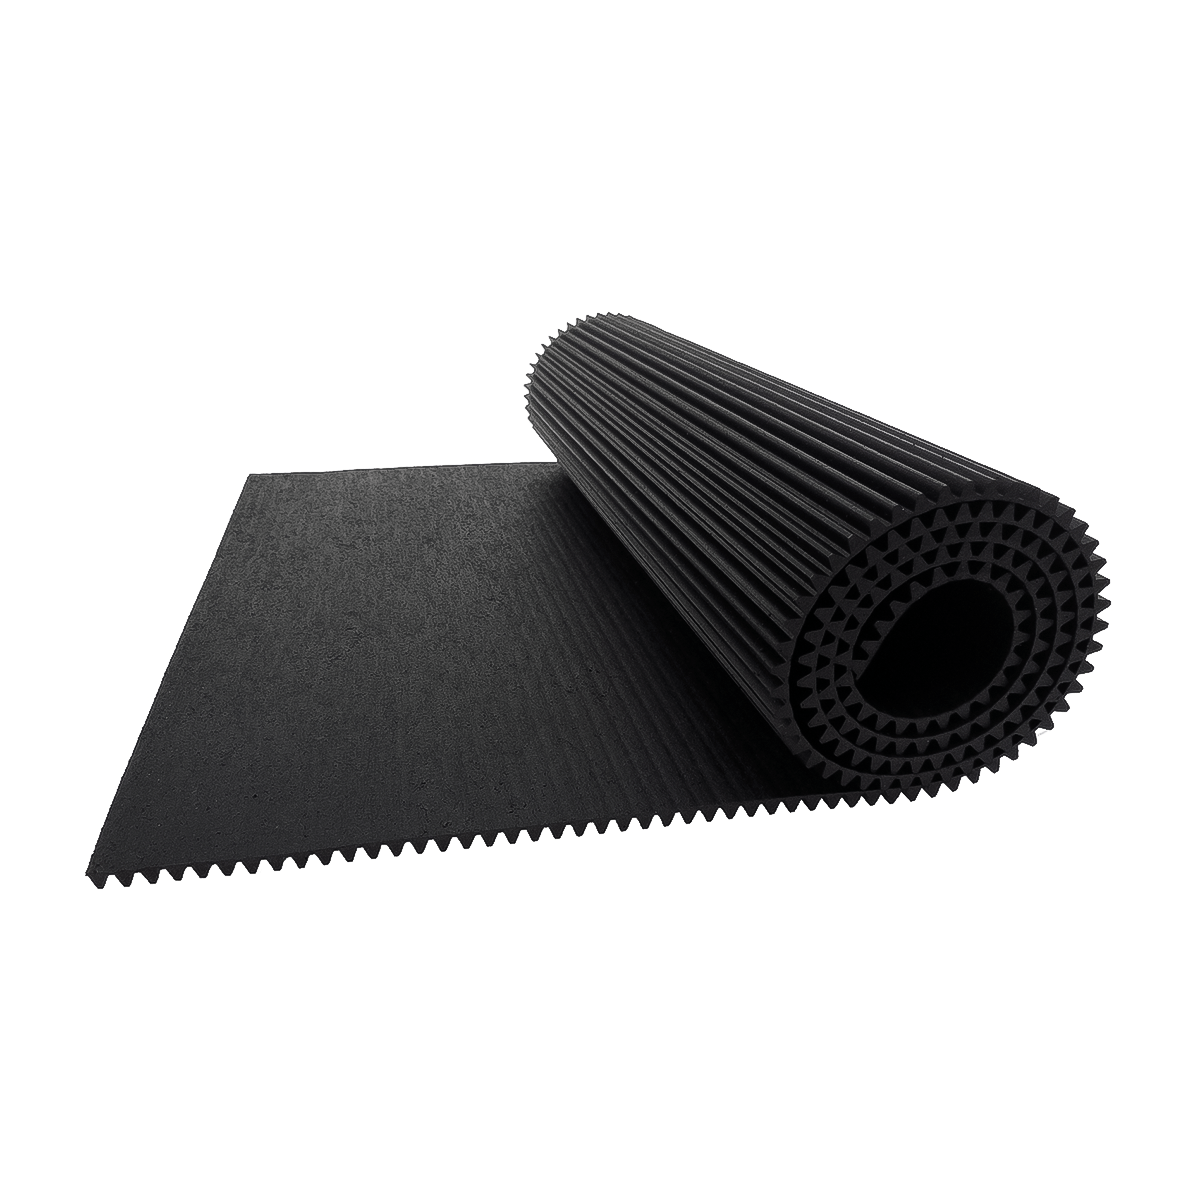 2' Width 1/8 thick Ribbed Rubber Runners Matting Black Choose